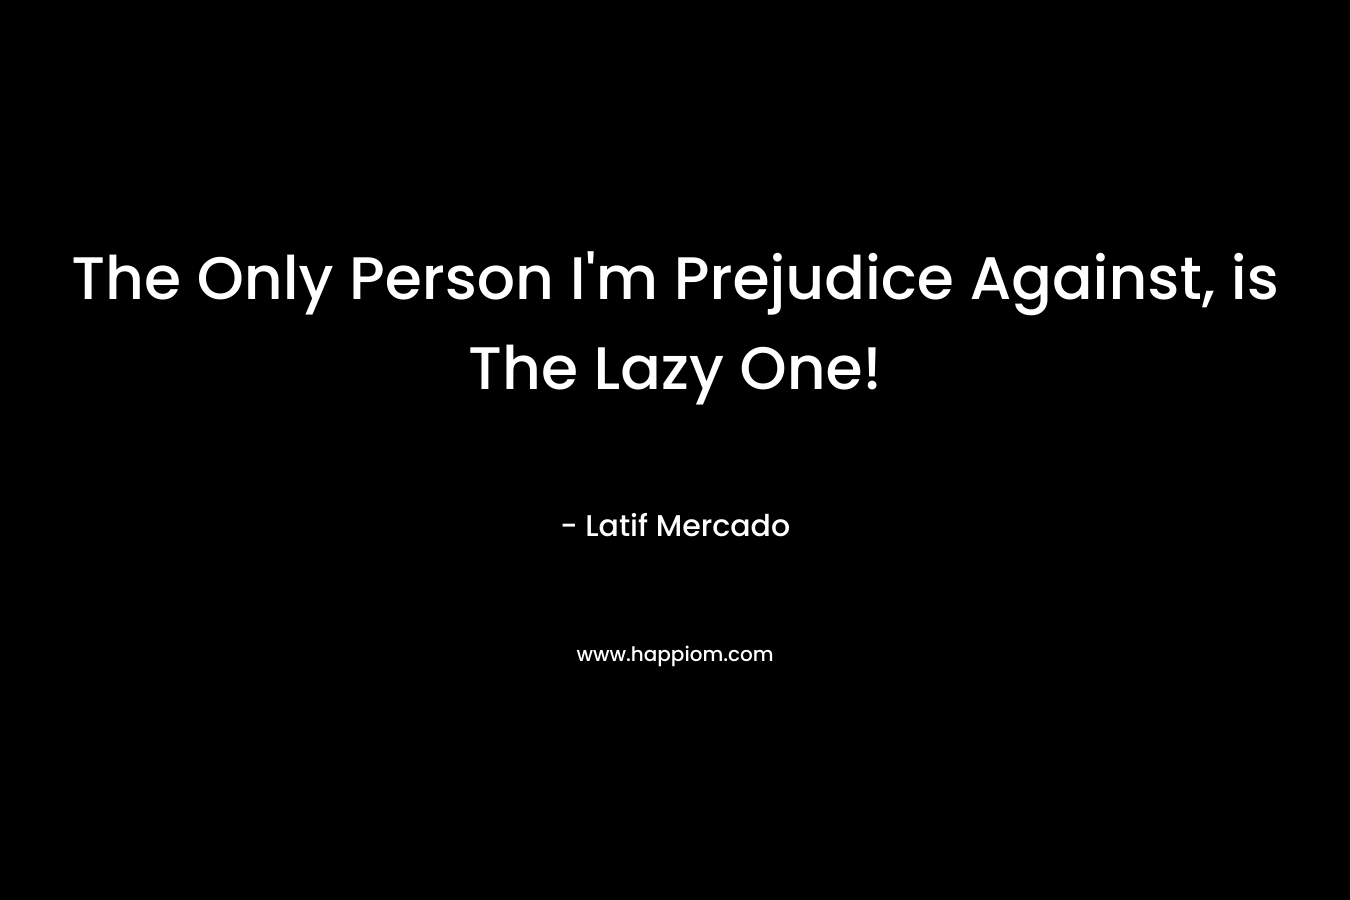 The Only Person I’m Prejudice Against, is The Lazy One! – Latif Mercado